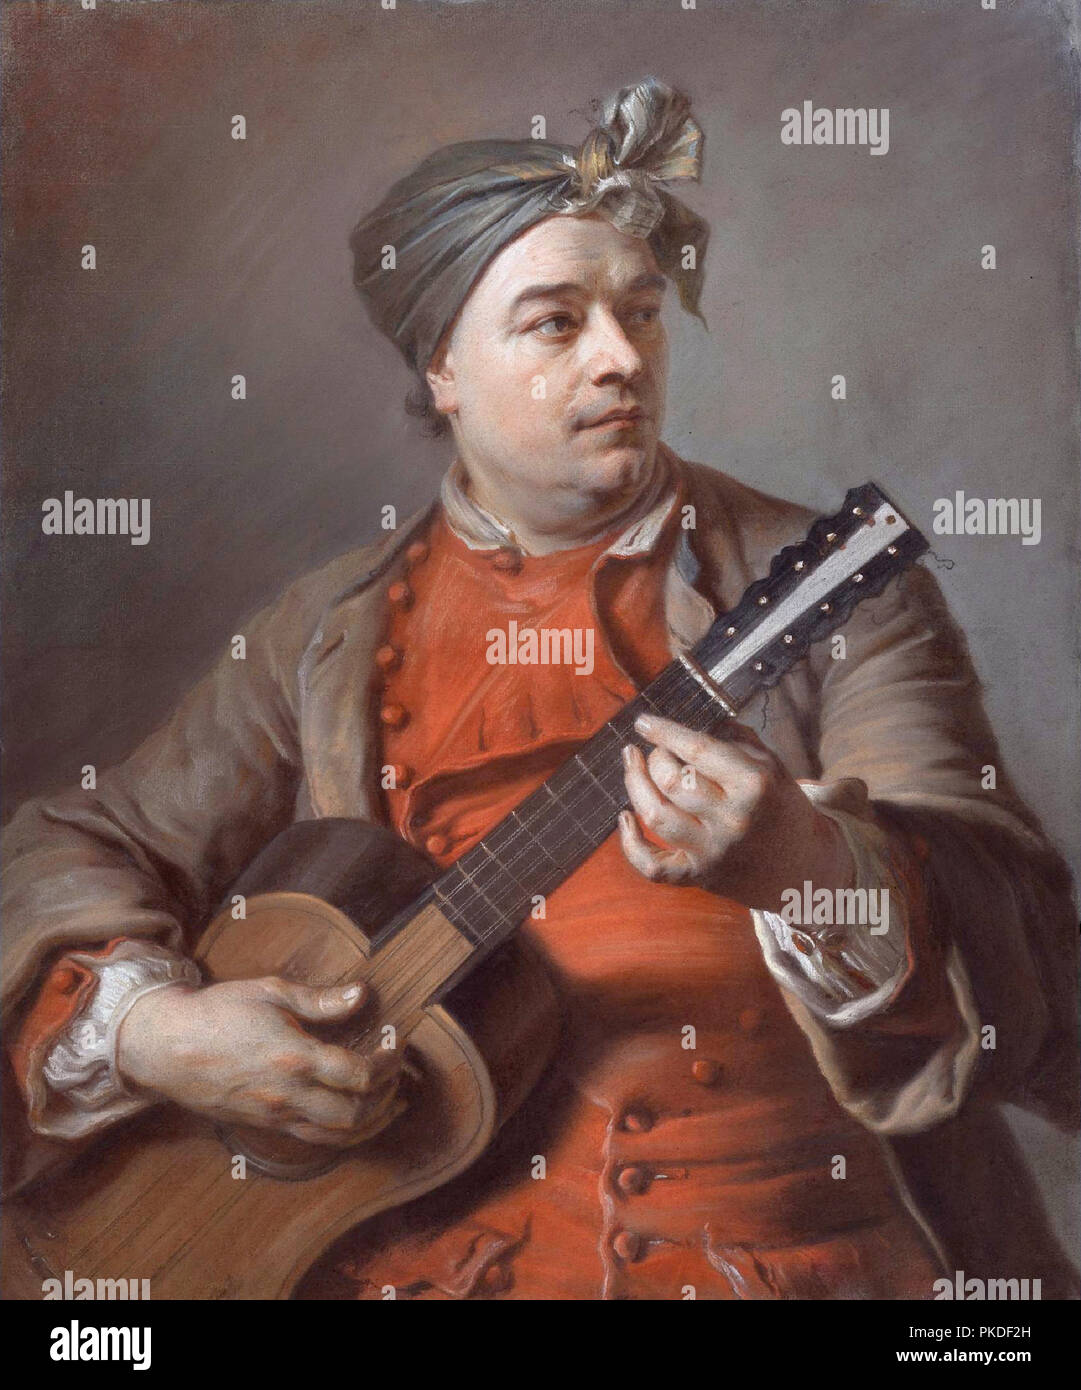 Jacques Dumont, 'le Romain' (1704 - 1781), French history and portrait painter. Portrait of Jacques Dumont Le Romain Playing the Guitar by Maurice Quentin de La Tour Stock Photo